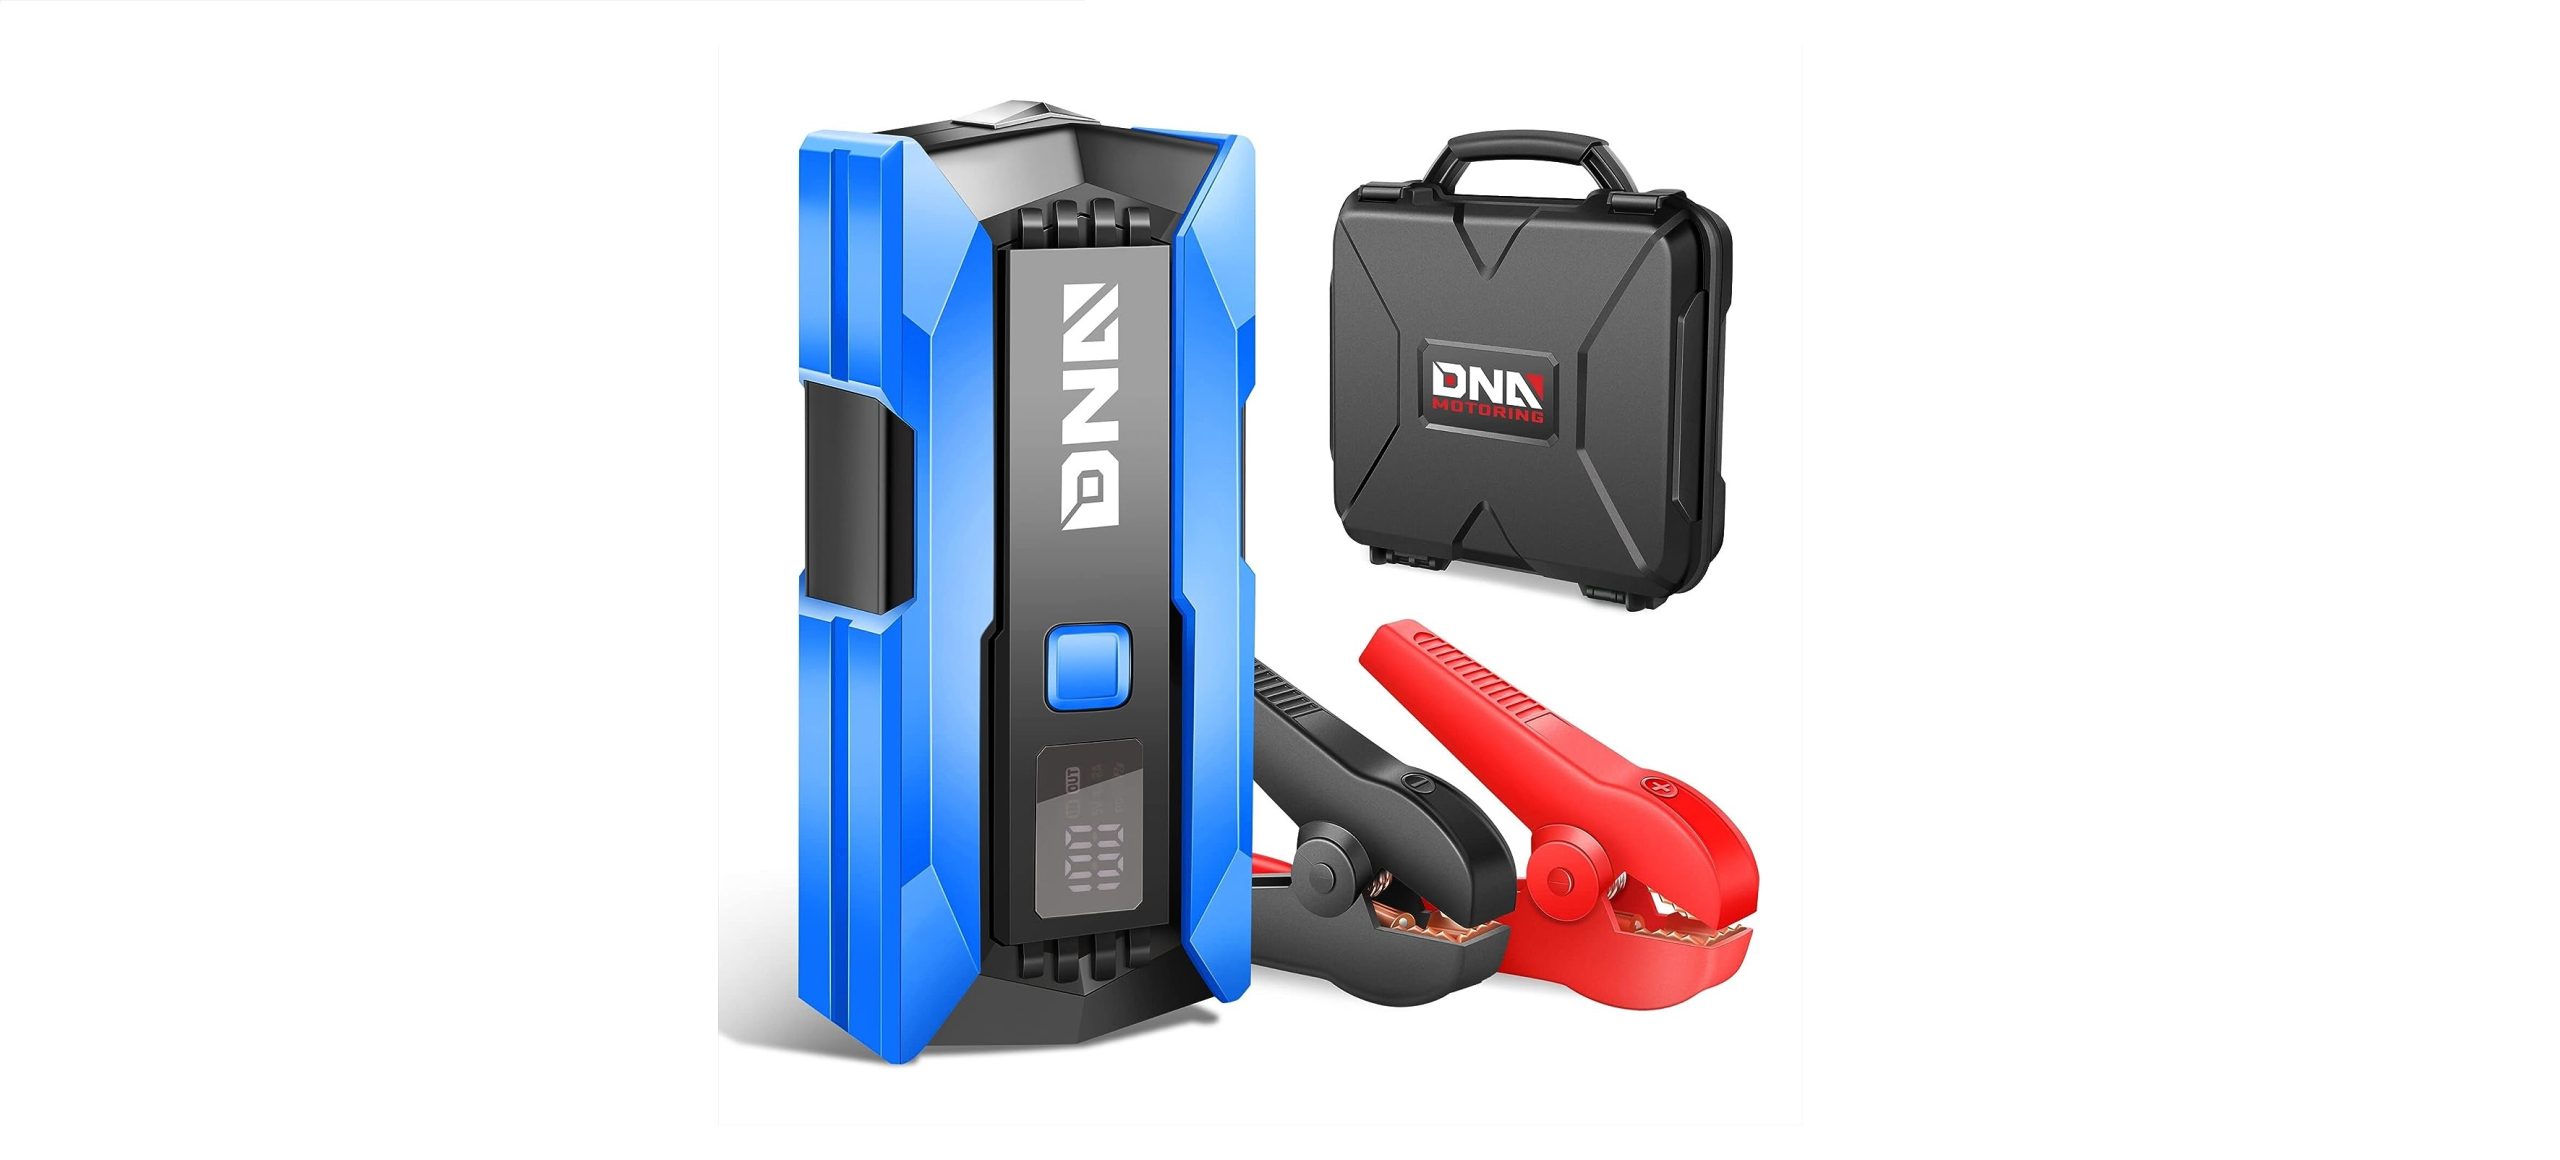 One Of The Most Popular Christmas Gifts for Men - Portable Car Jump Starter